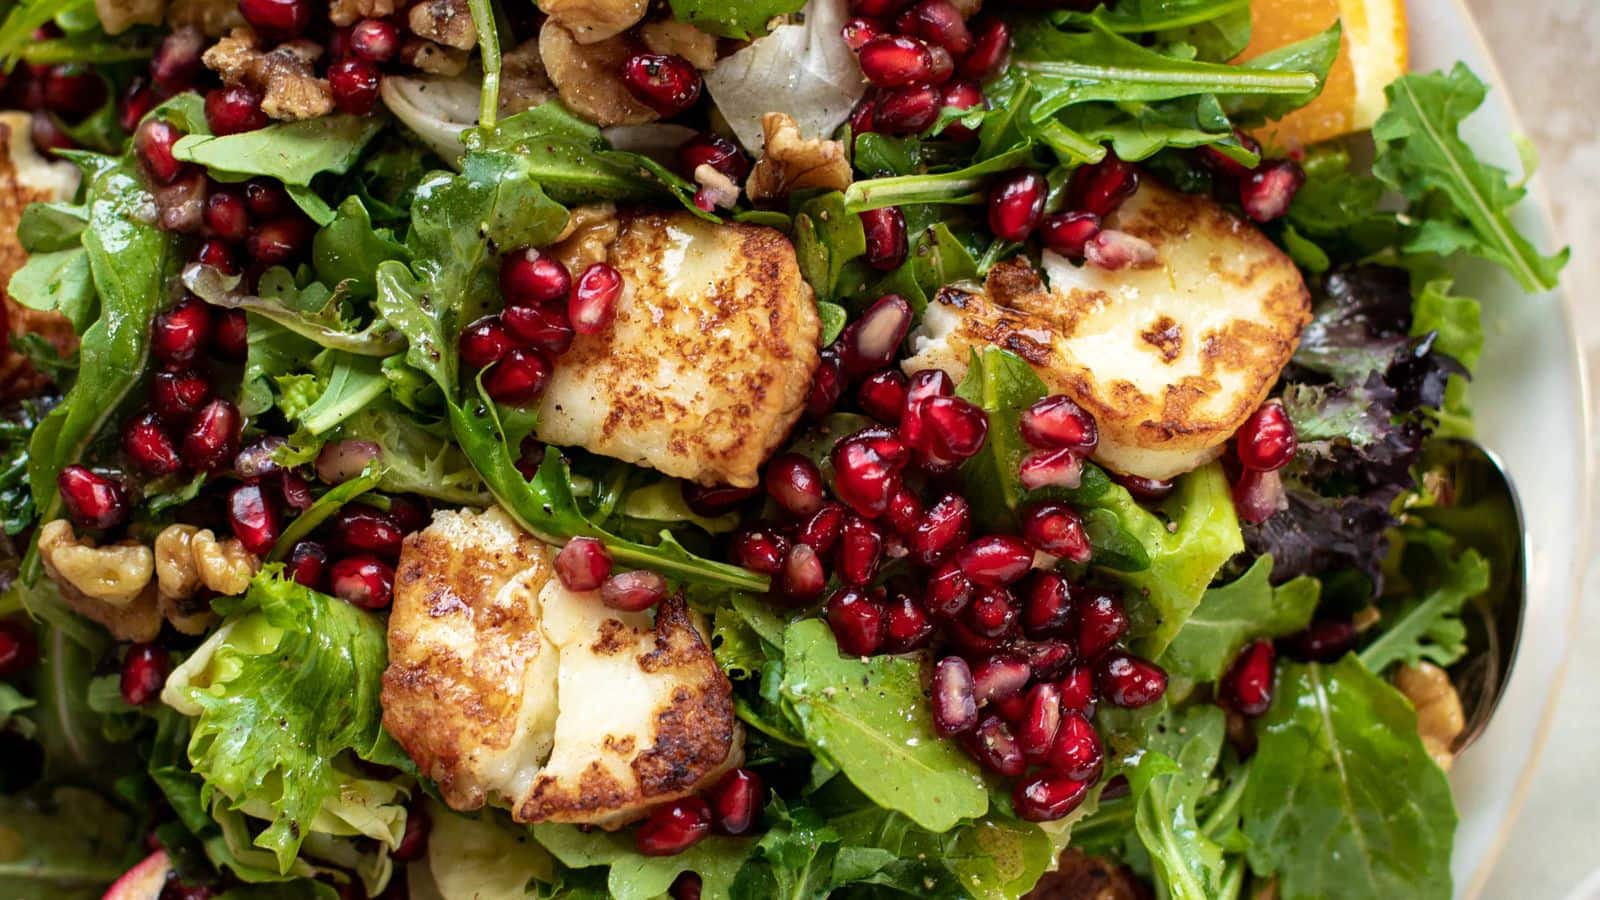 Try these pomegranate salads for an antioxidant boost